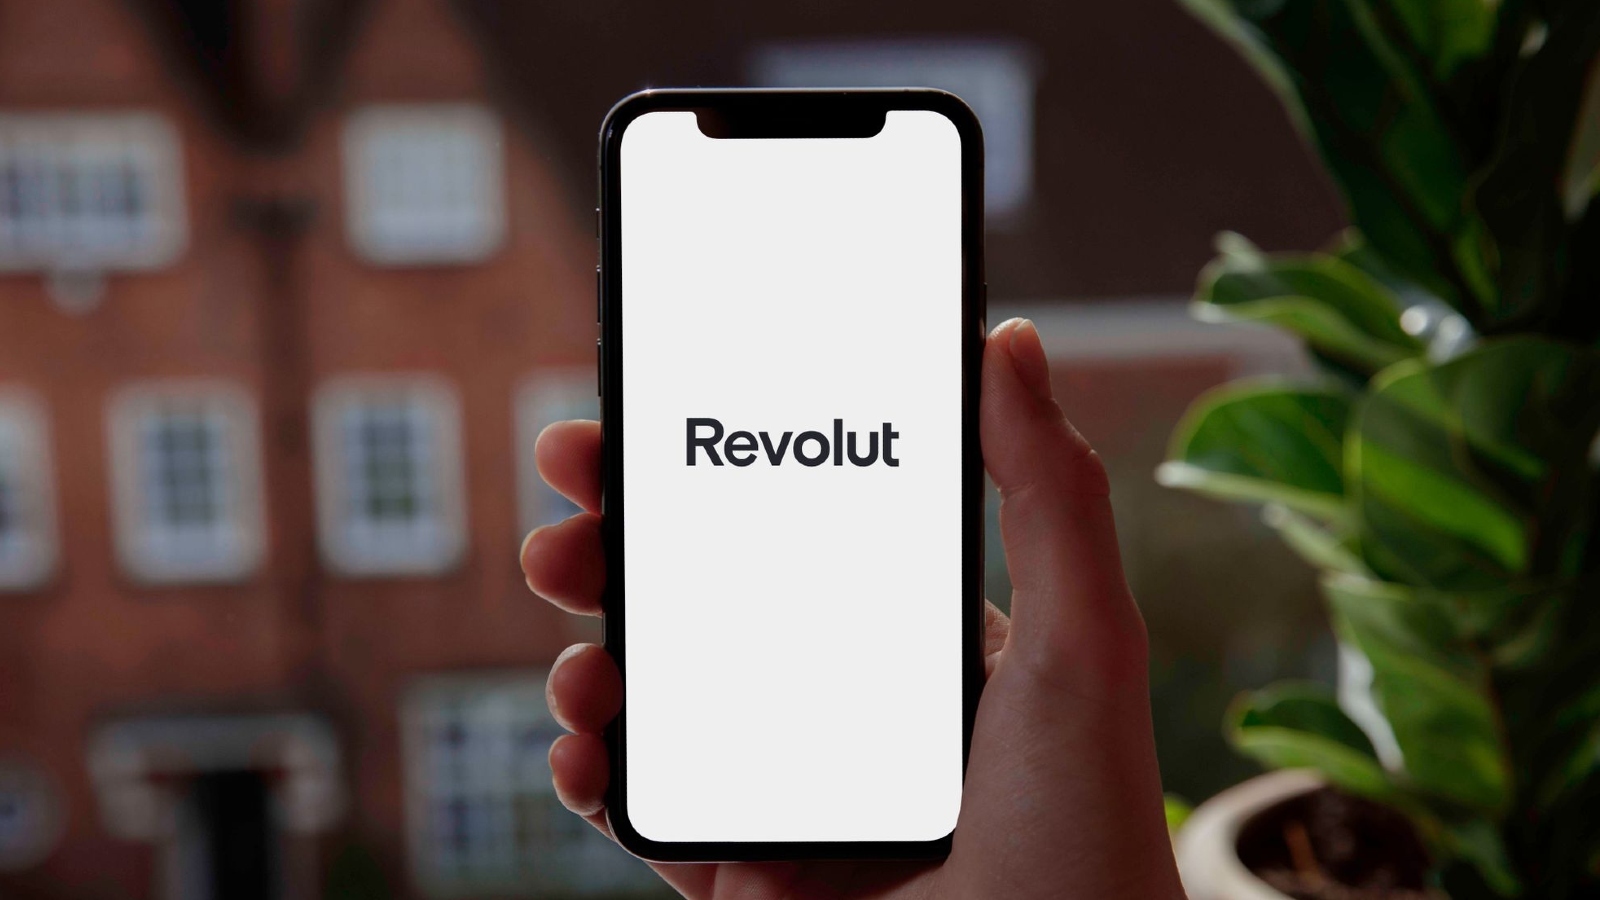 Revolut hack exposes data of 50,000 users, fuels new phishing wave